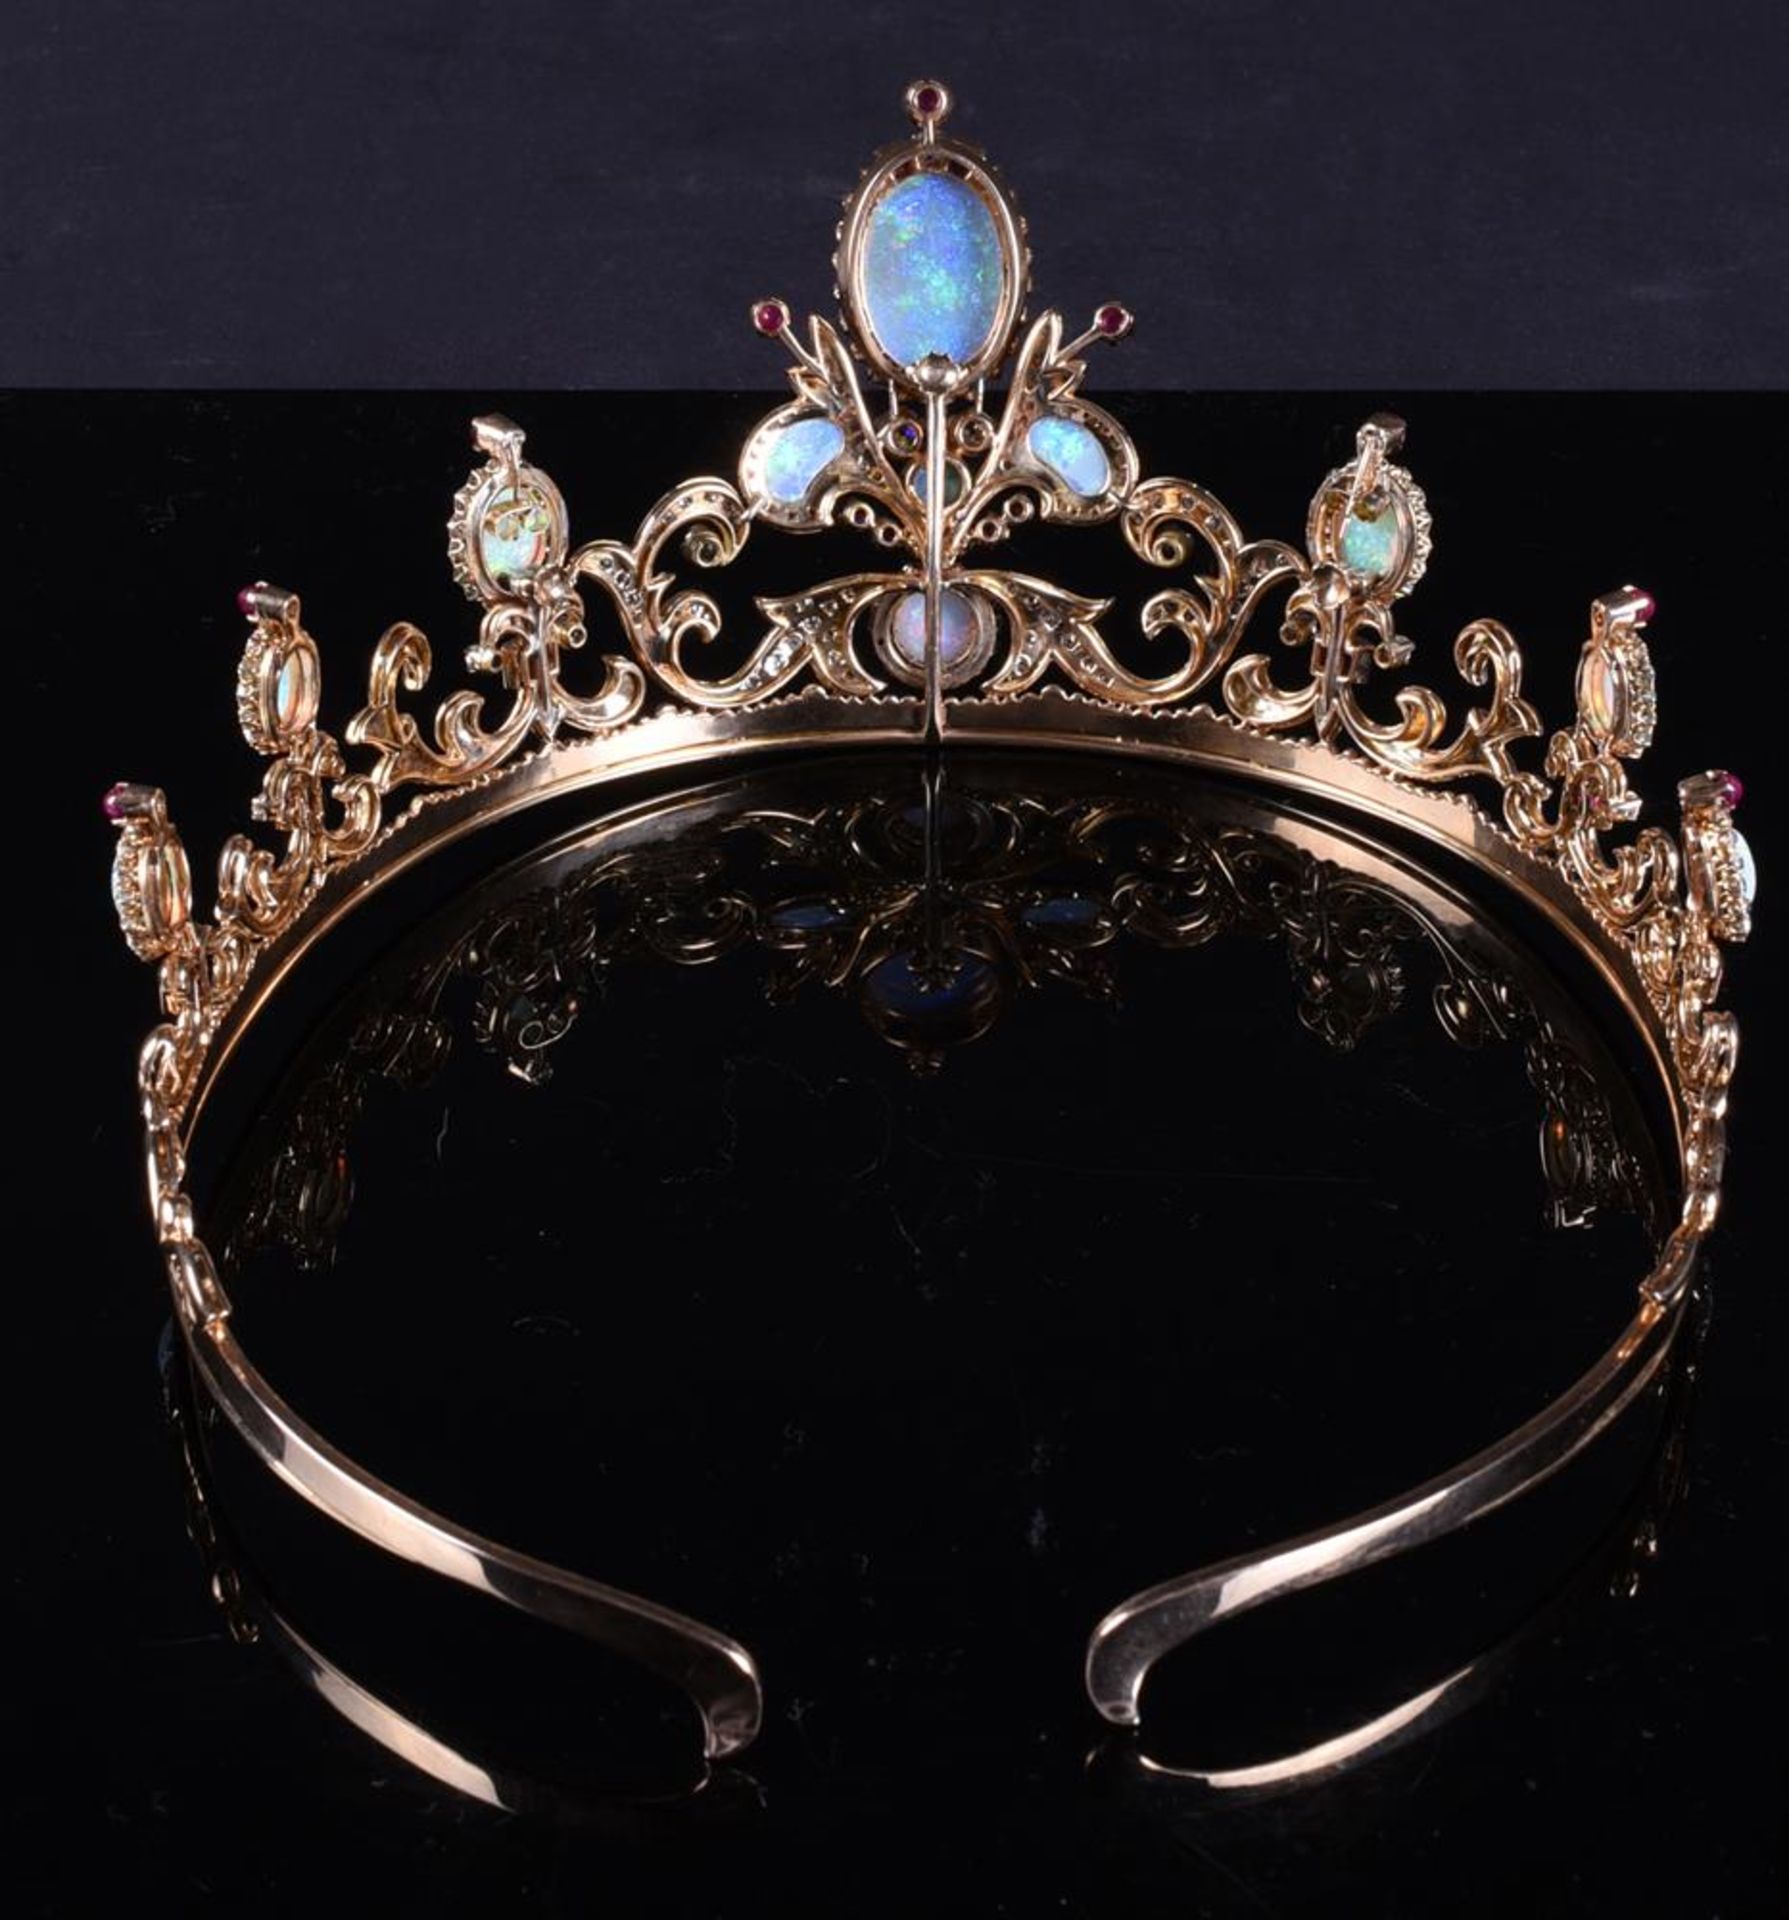 A MID 20TH CENTURY DIAMOND, OPAL, AND RUBY TIARA - Image 7 of 7